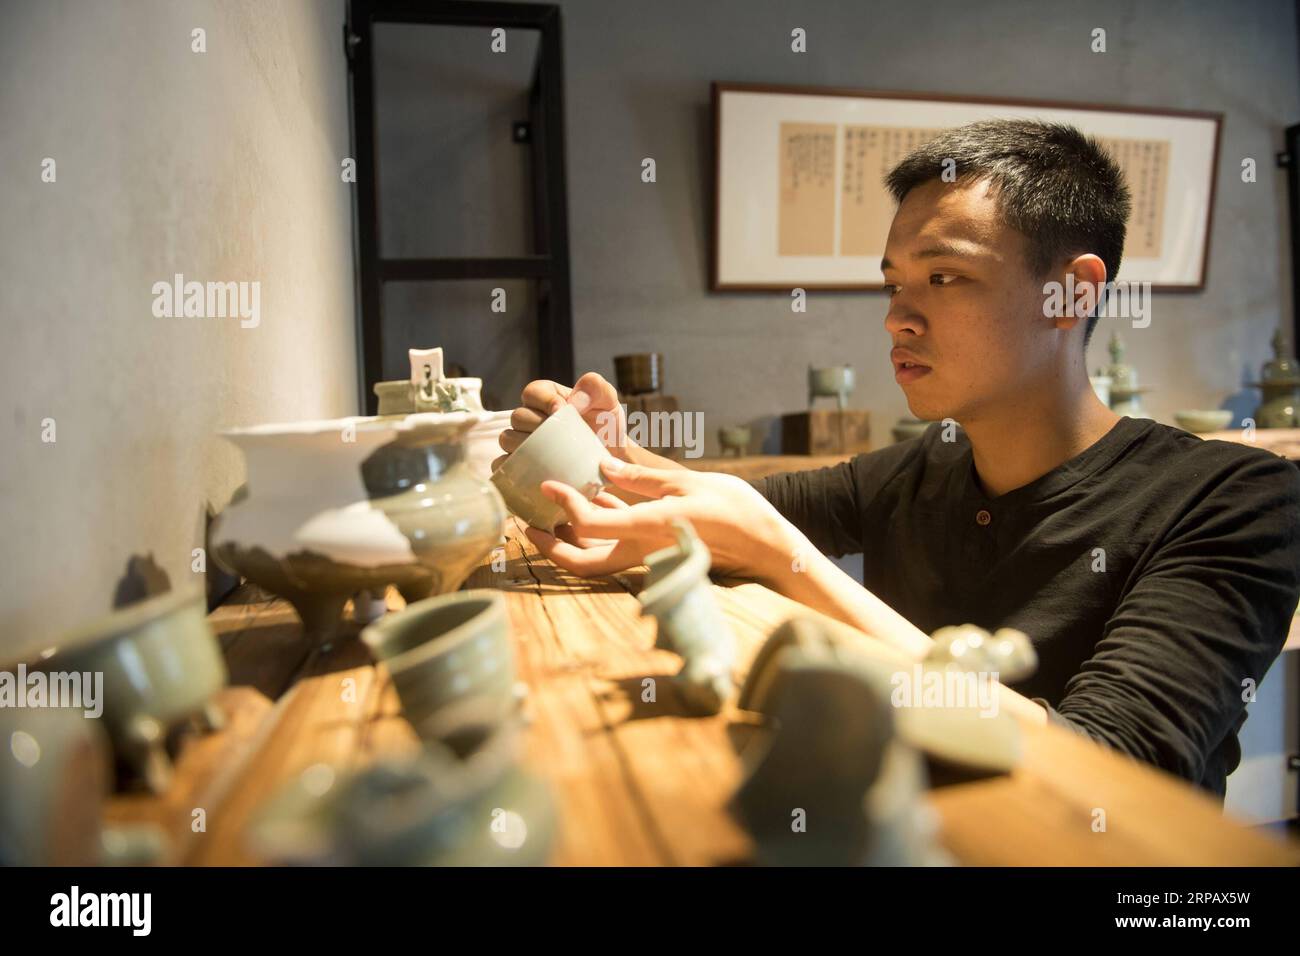 (190520) -- LONGQUAN, May 20, 2019 (Xinhua) -- Lin Song checks his collection of classical Longquan celadon wares at his studio in Longquan, east China s Zhejiang Province, May 20, 2019. Born in 1993, Lin Song is a native of Longquan, home to China s best celadon wares. He received professional training in both his hometown and Jingdezhen, another important porcelain hub of China. Lin had also followed other celadon artisans for years before setting up a studio back home in 2014, focusing on the replication of classical celadon incense burners. Lin s personal collection has grown to over 40 ce Stock Photo